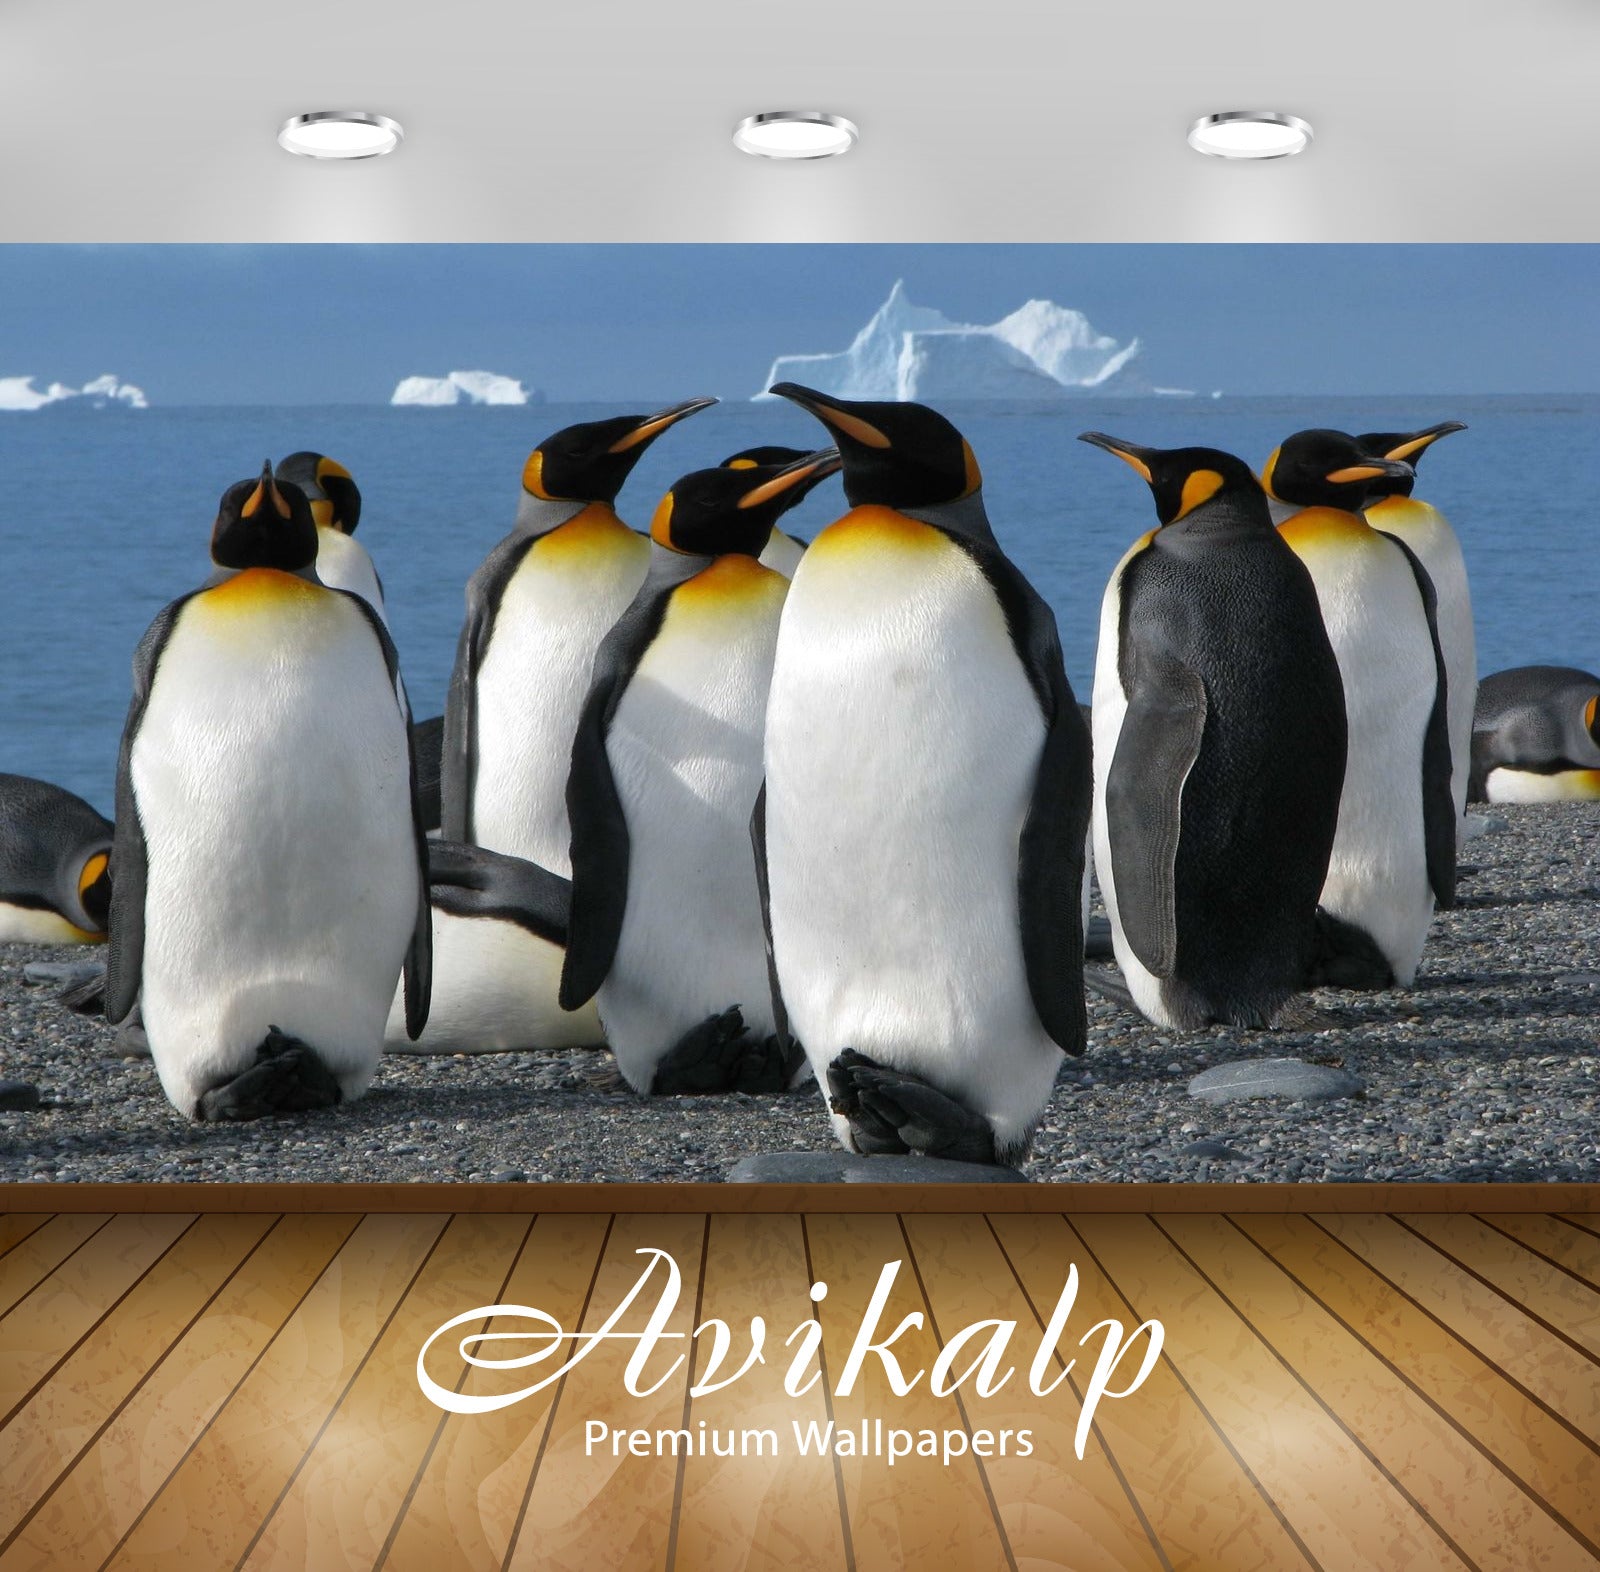 Avikalp Exclusive Awi2753 King Penguins Aptenodytes Patagonicus Full HD Wallpapers for Living room,